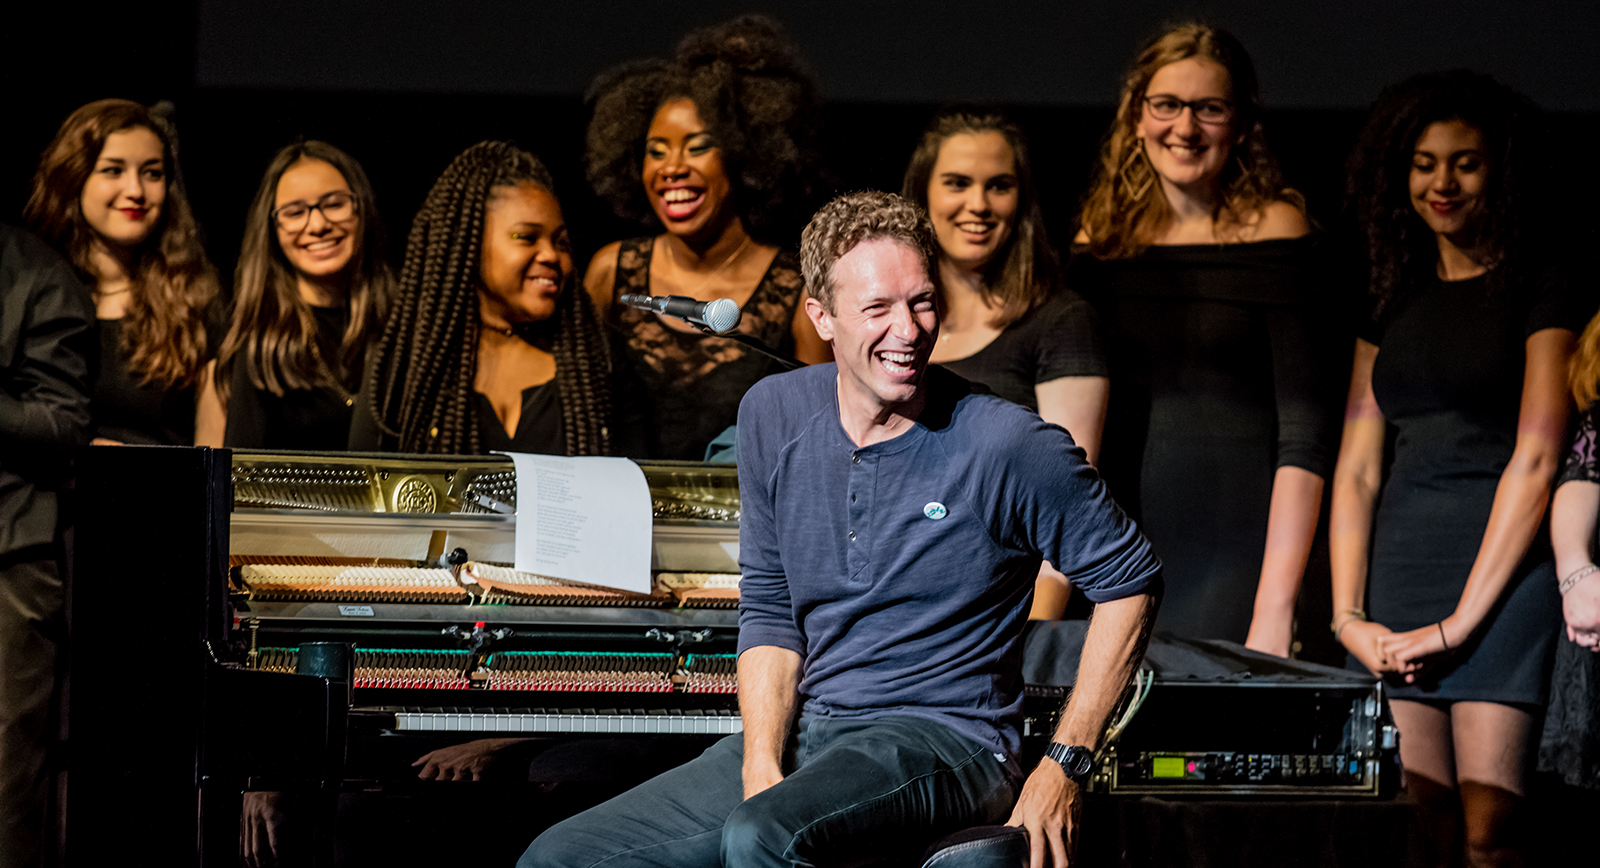 Notes-And-Words-2016-Concert-Review-Photos-Chris-Martin-Oakland-Children's-Hospital-FI